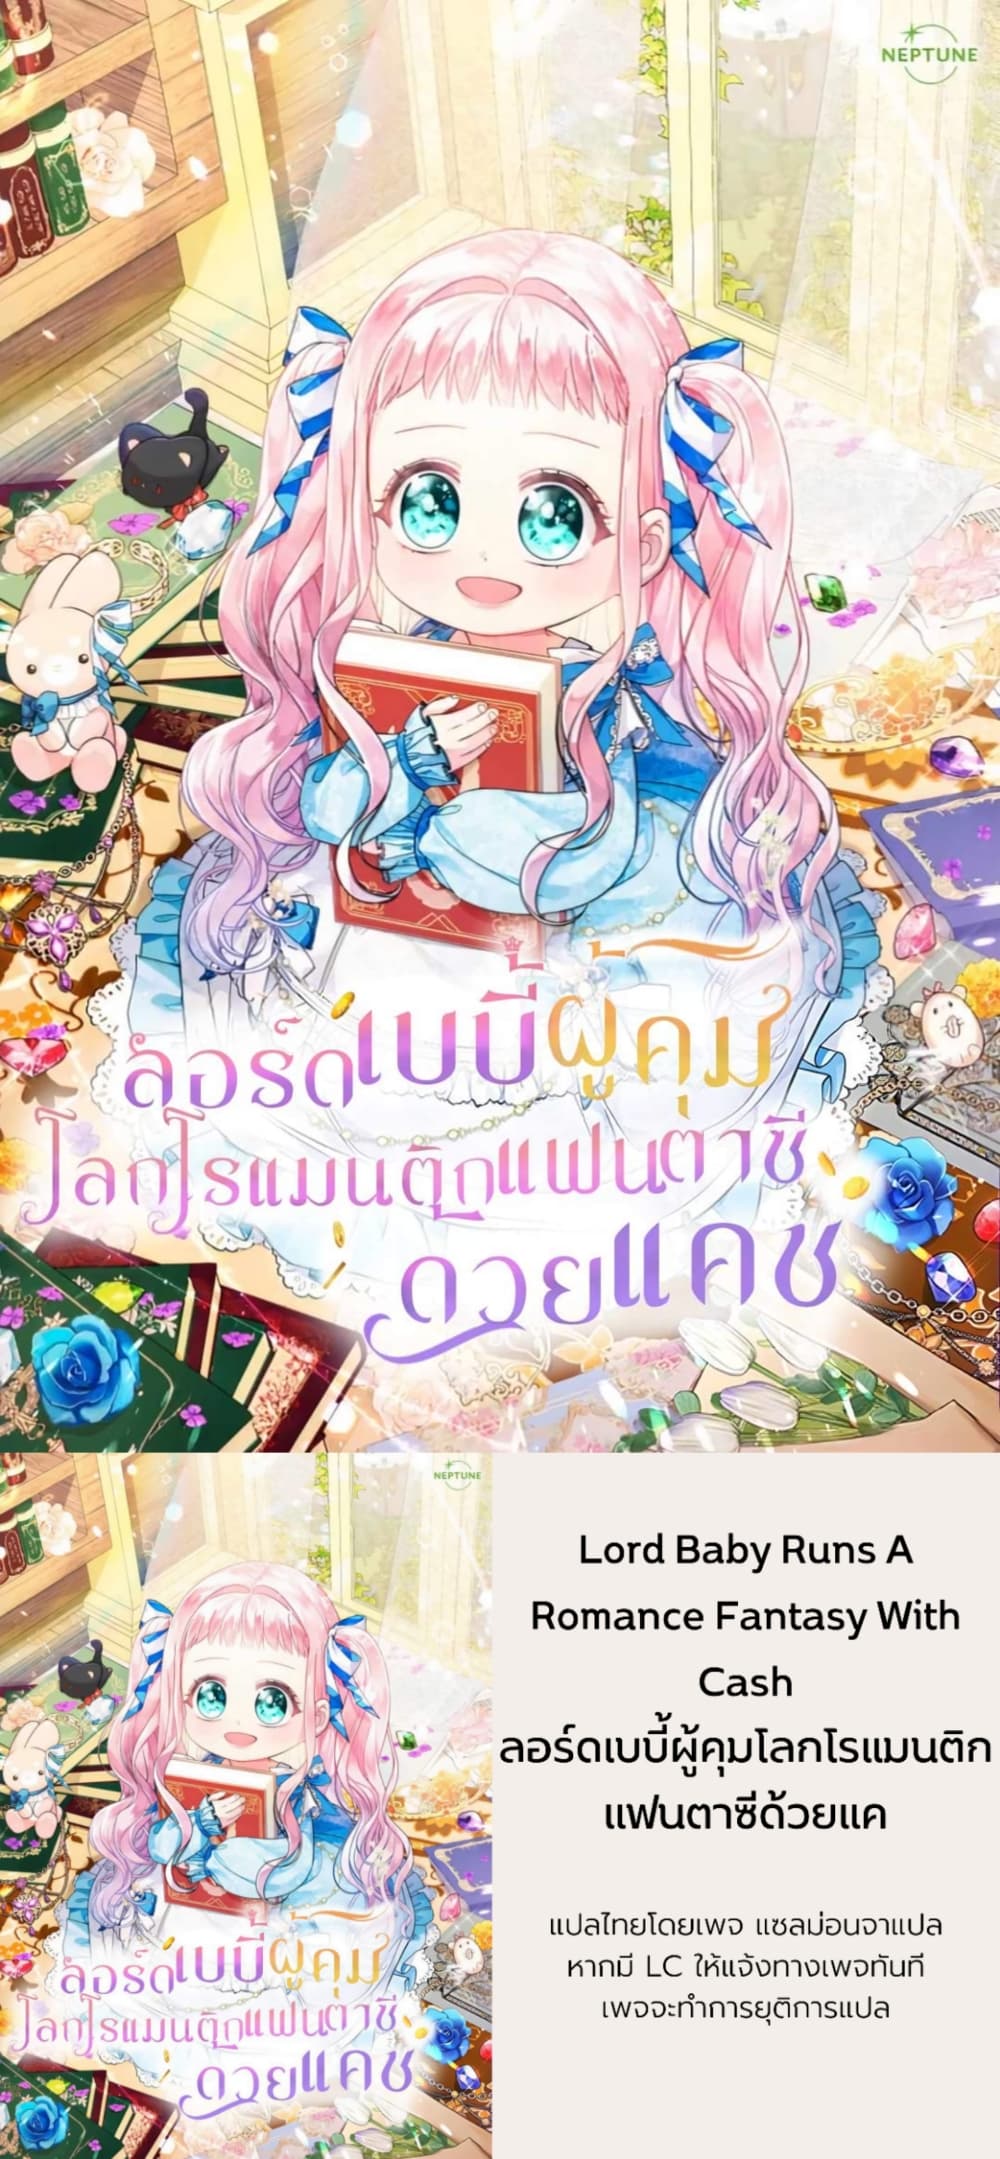 Lord Baby Runs a Romance Fantasy With Cash 18-18